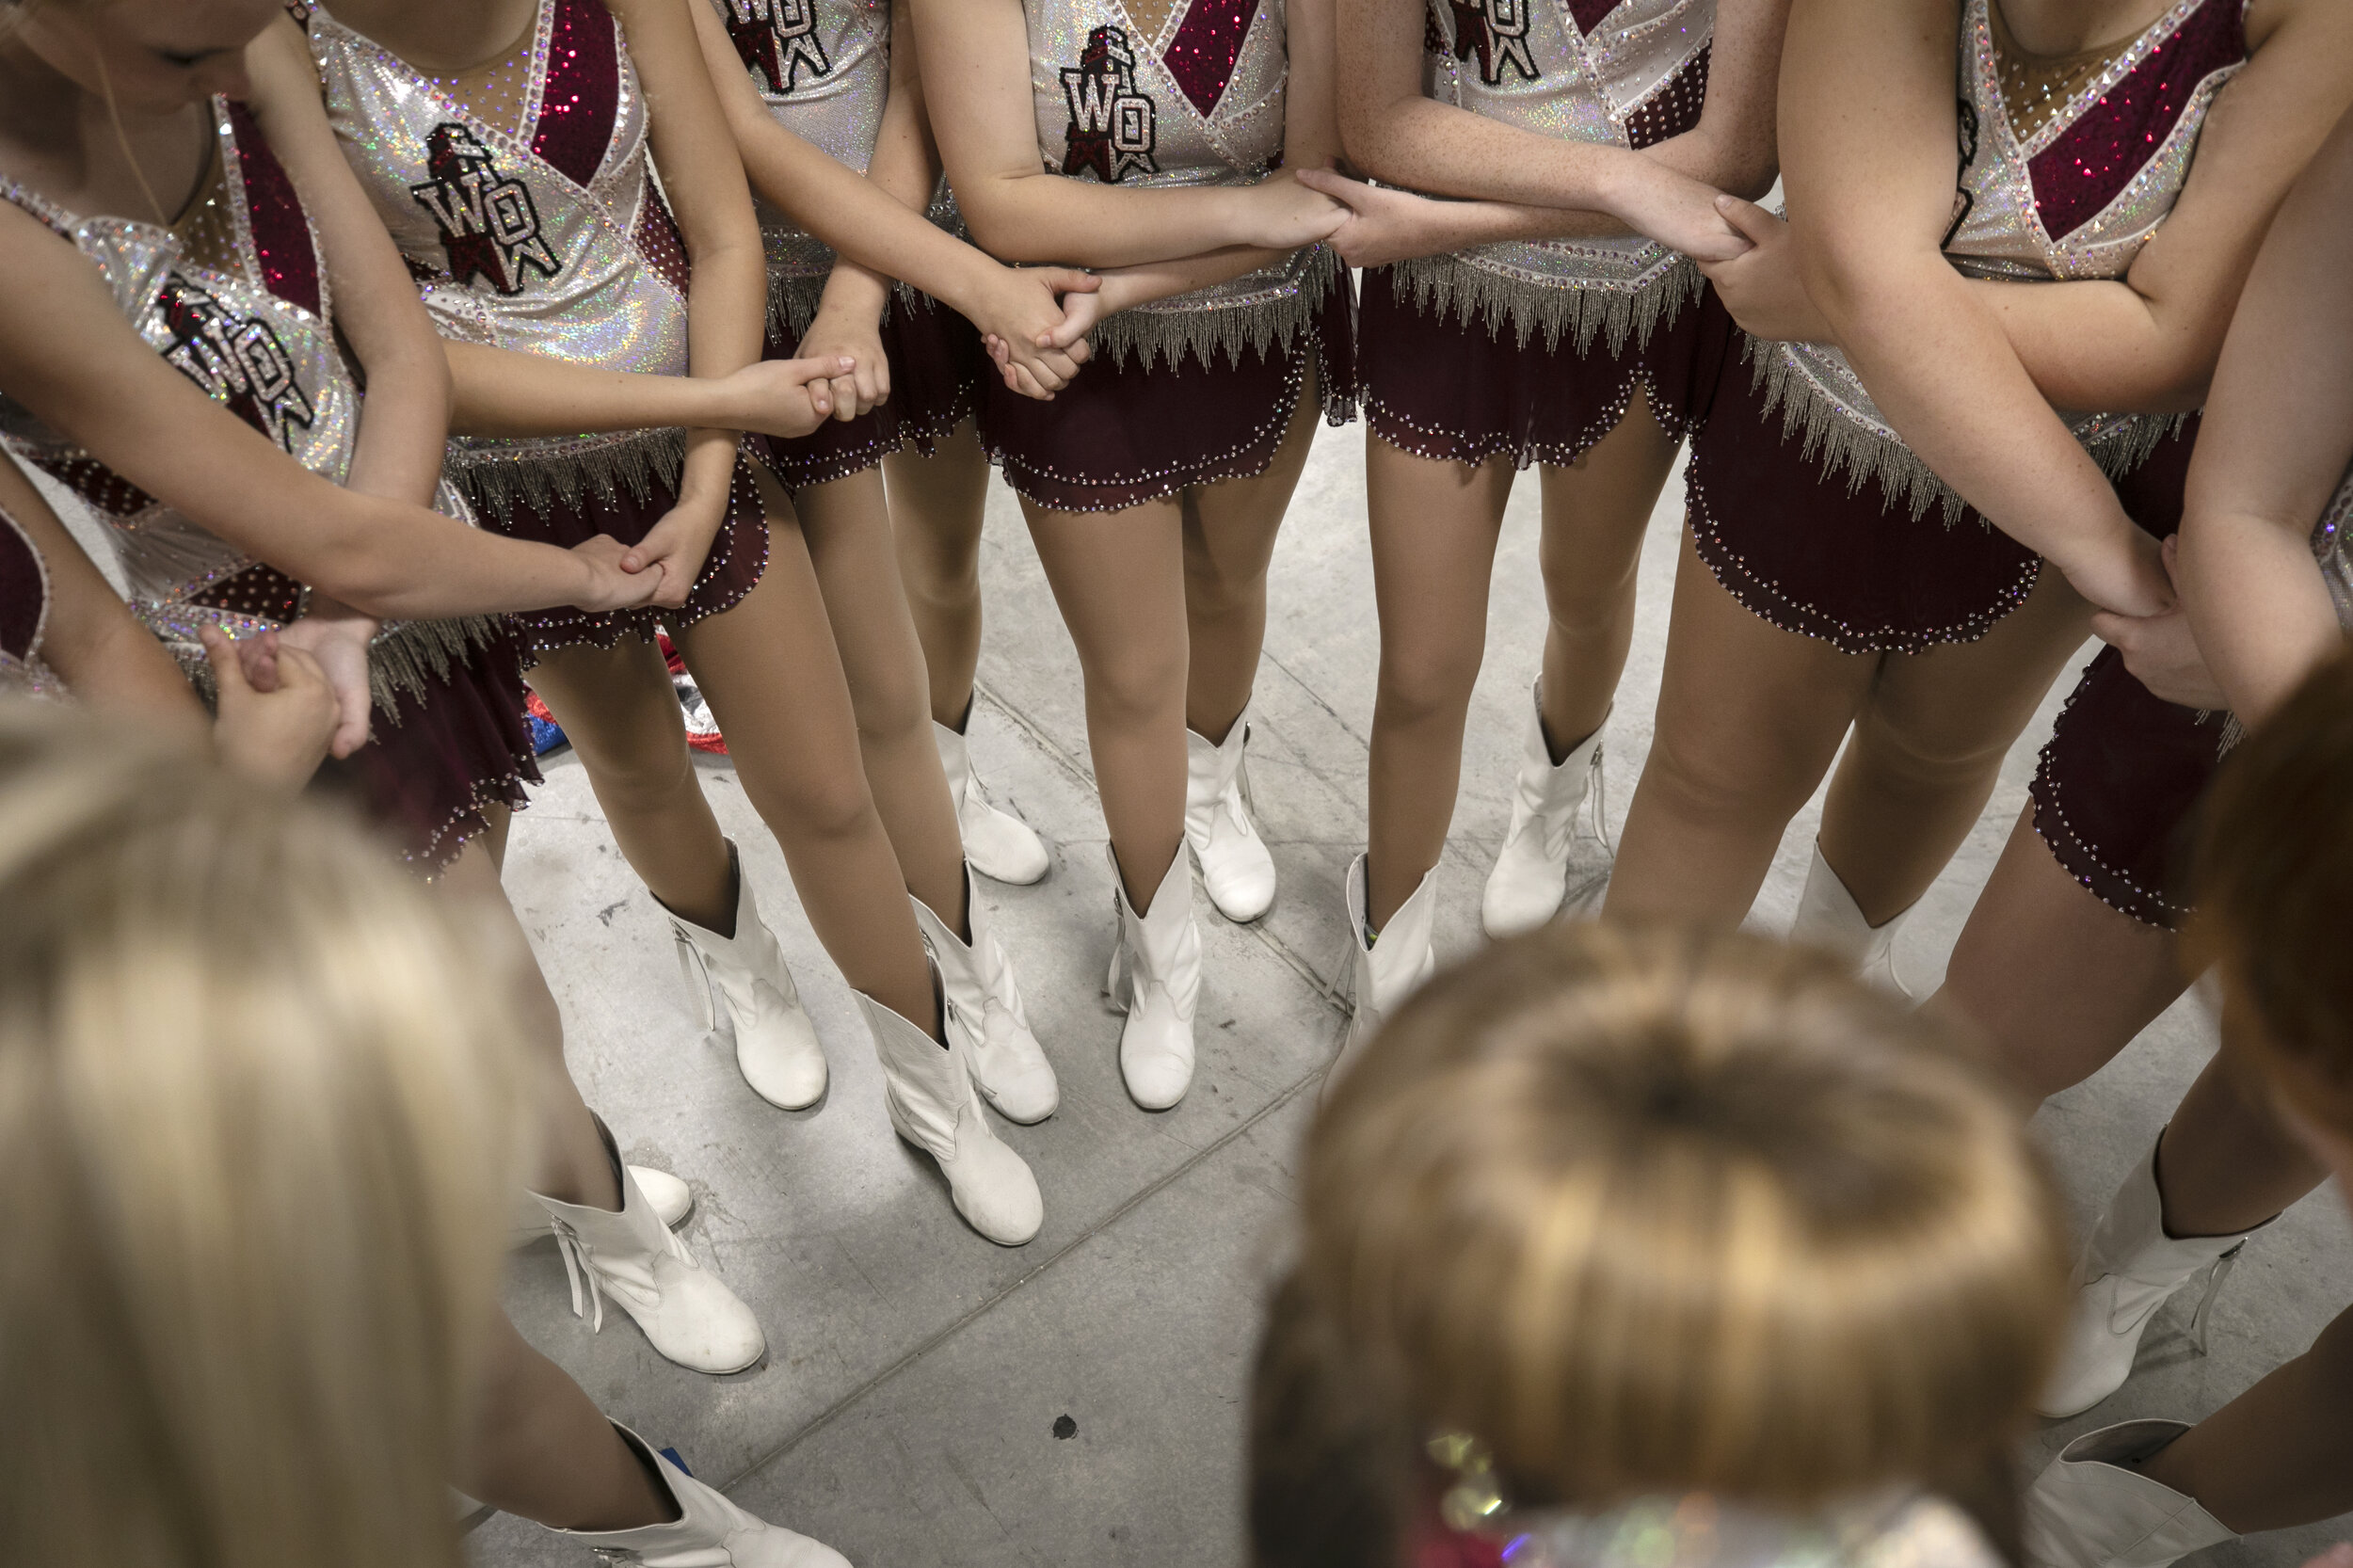  Majorettes pray together before the competition. 